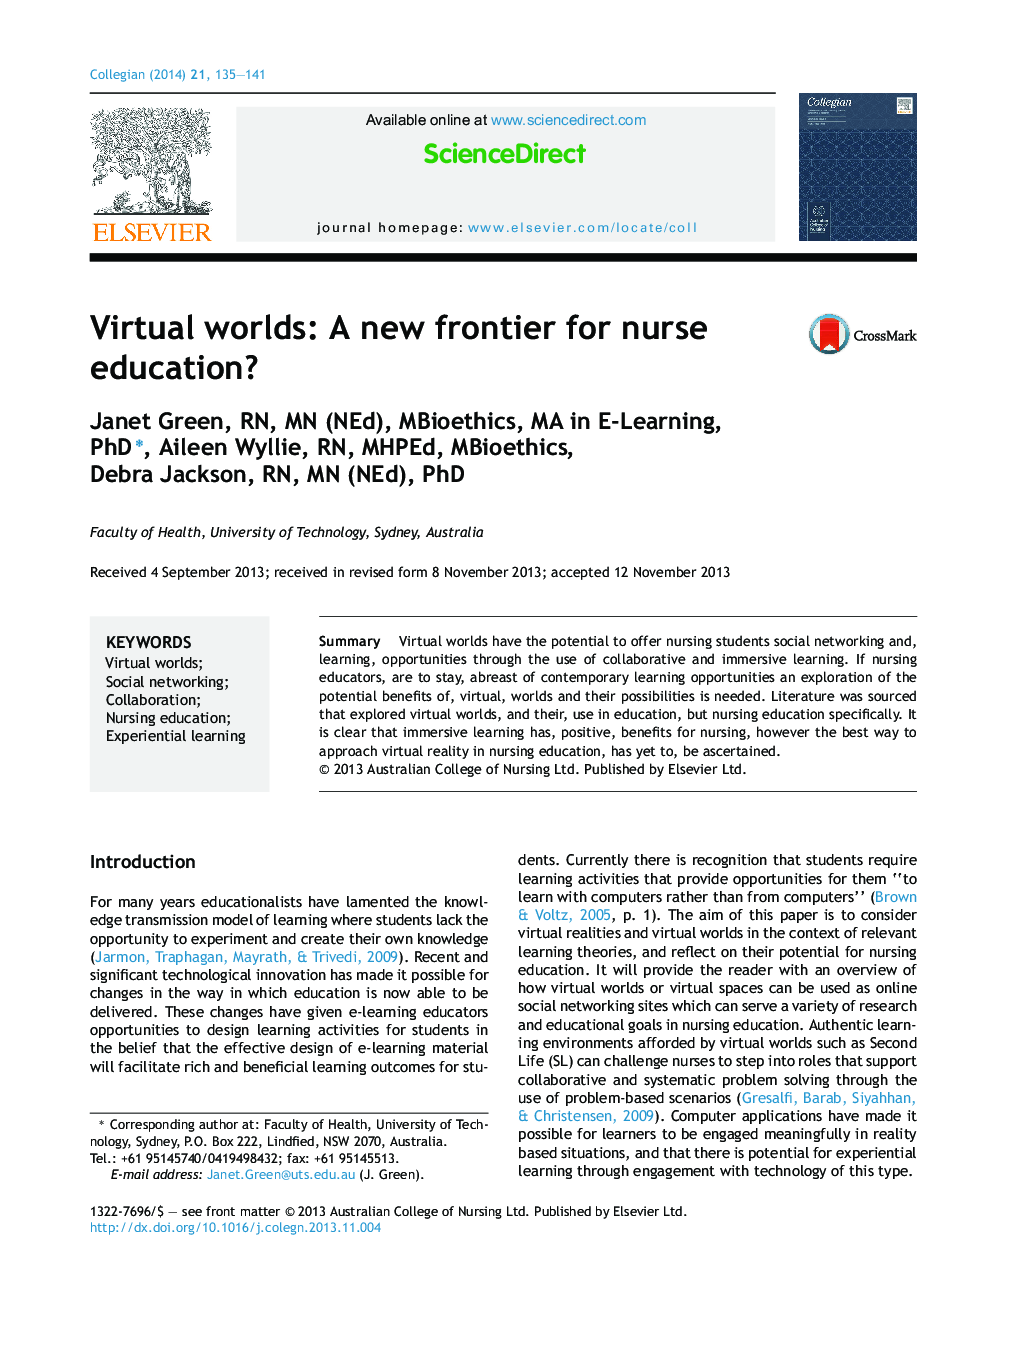 Virtual worlds: A new frontier for nurse education?